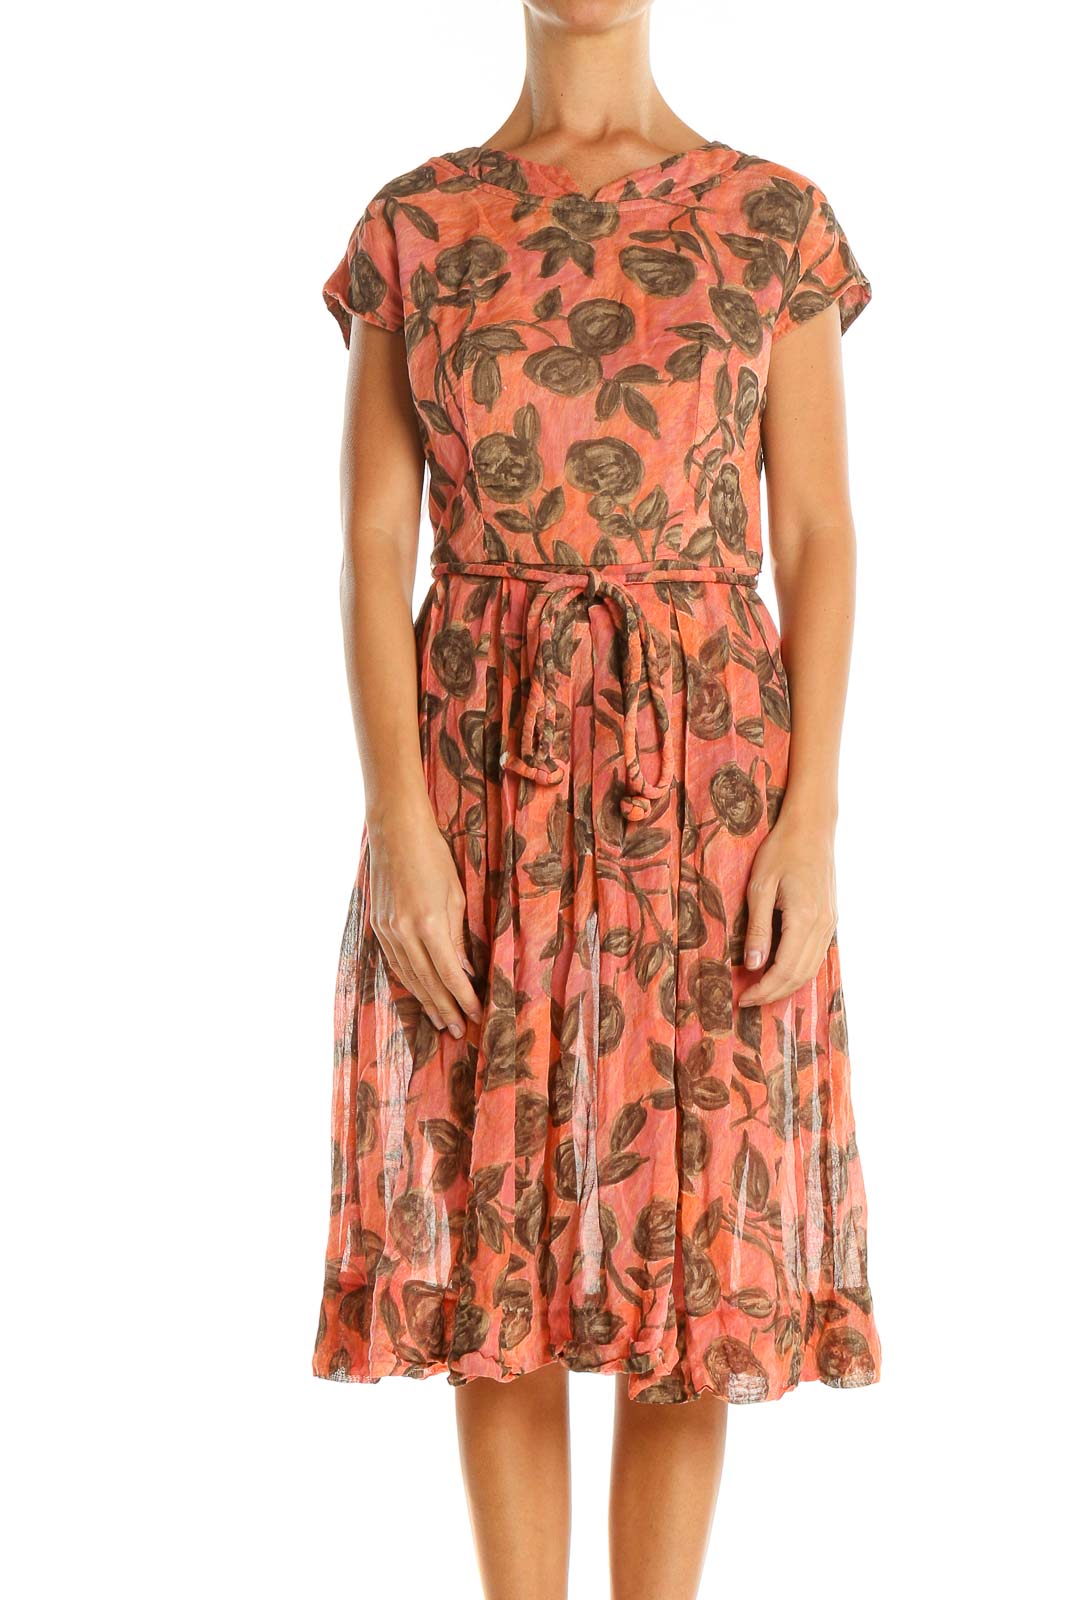 Salmon Floral Print Retro Fit & Flare Dress Front